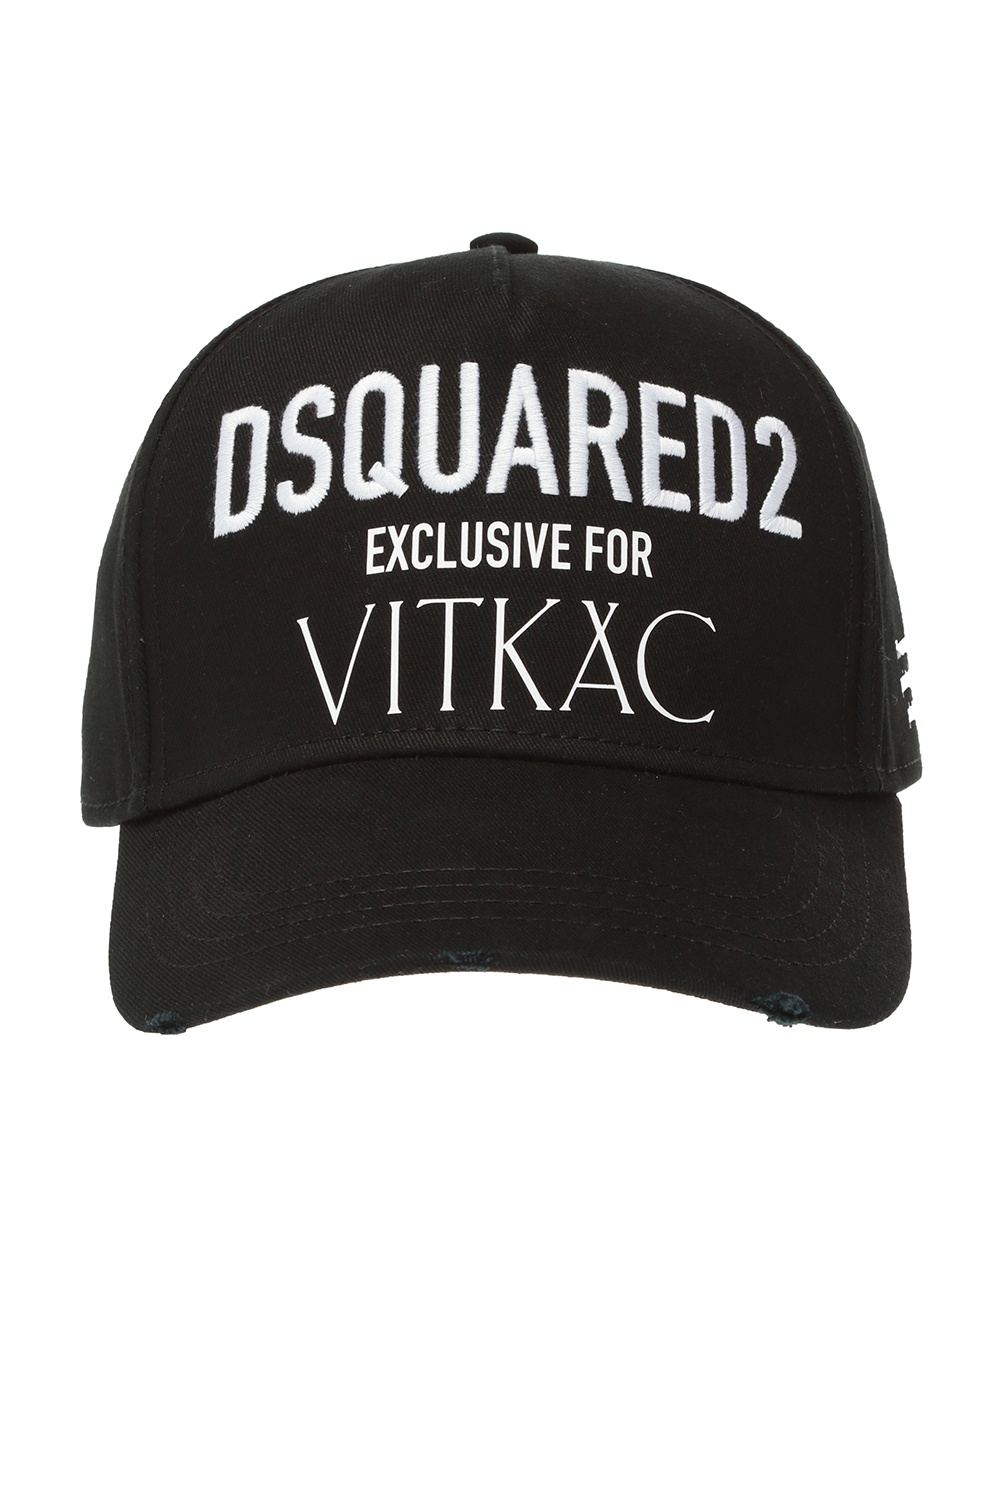 EXCLUSIVE FOR VITKAC' LIMITED 